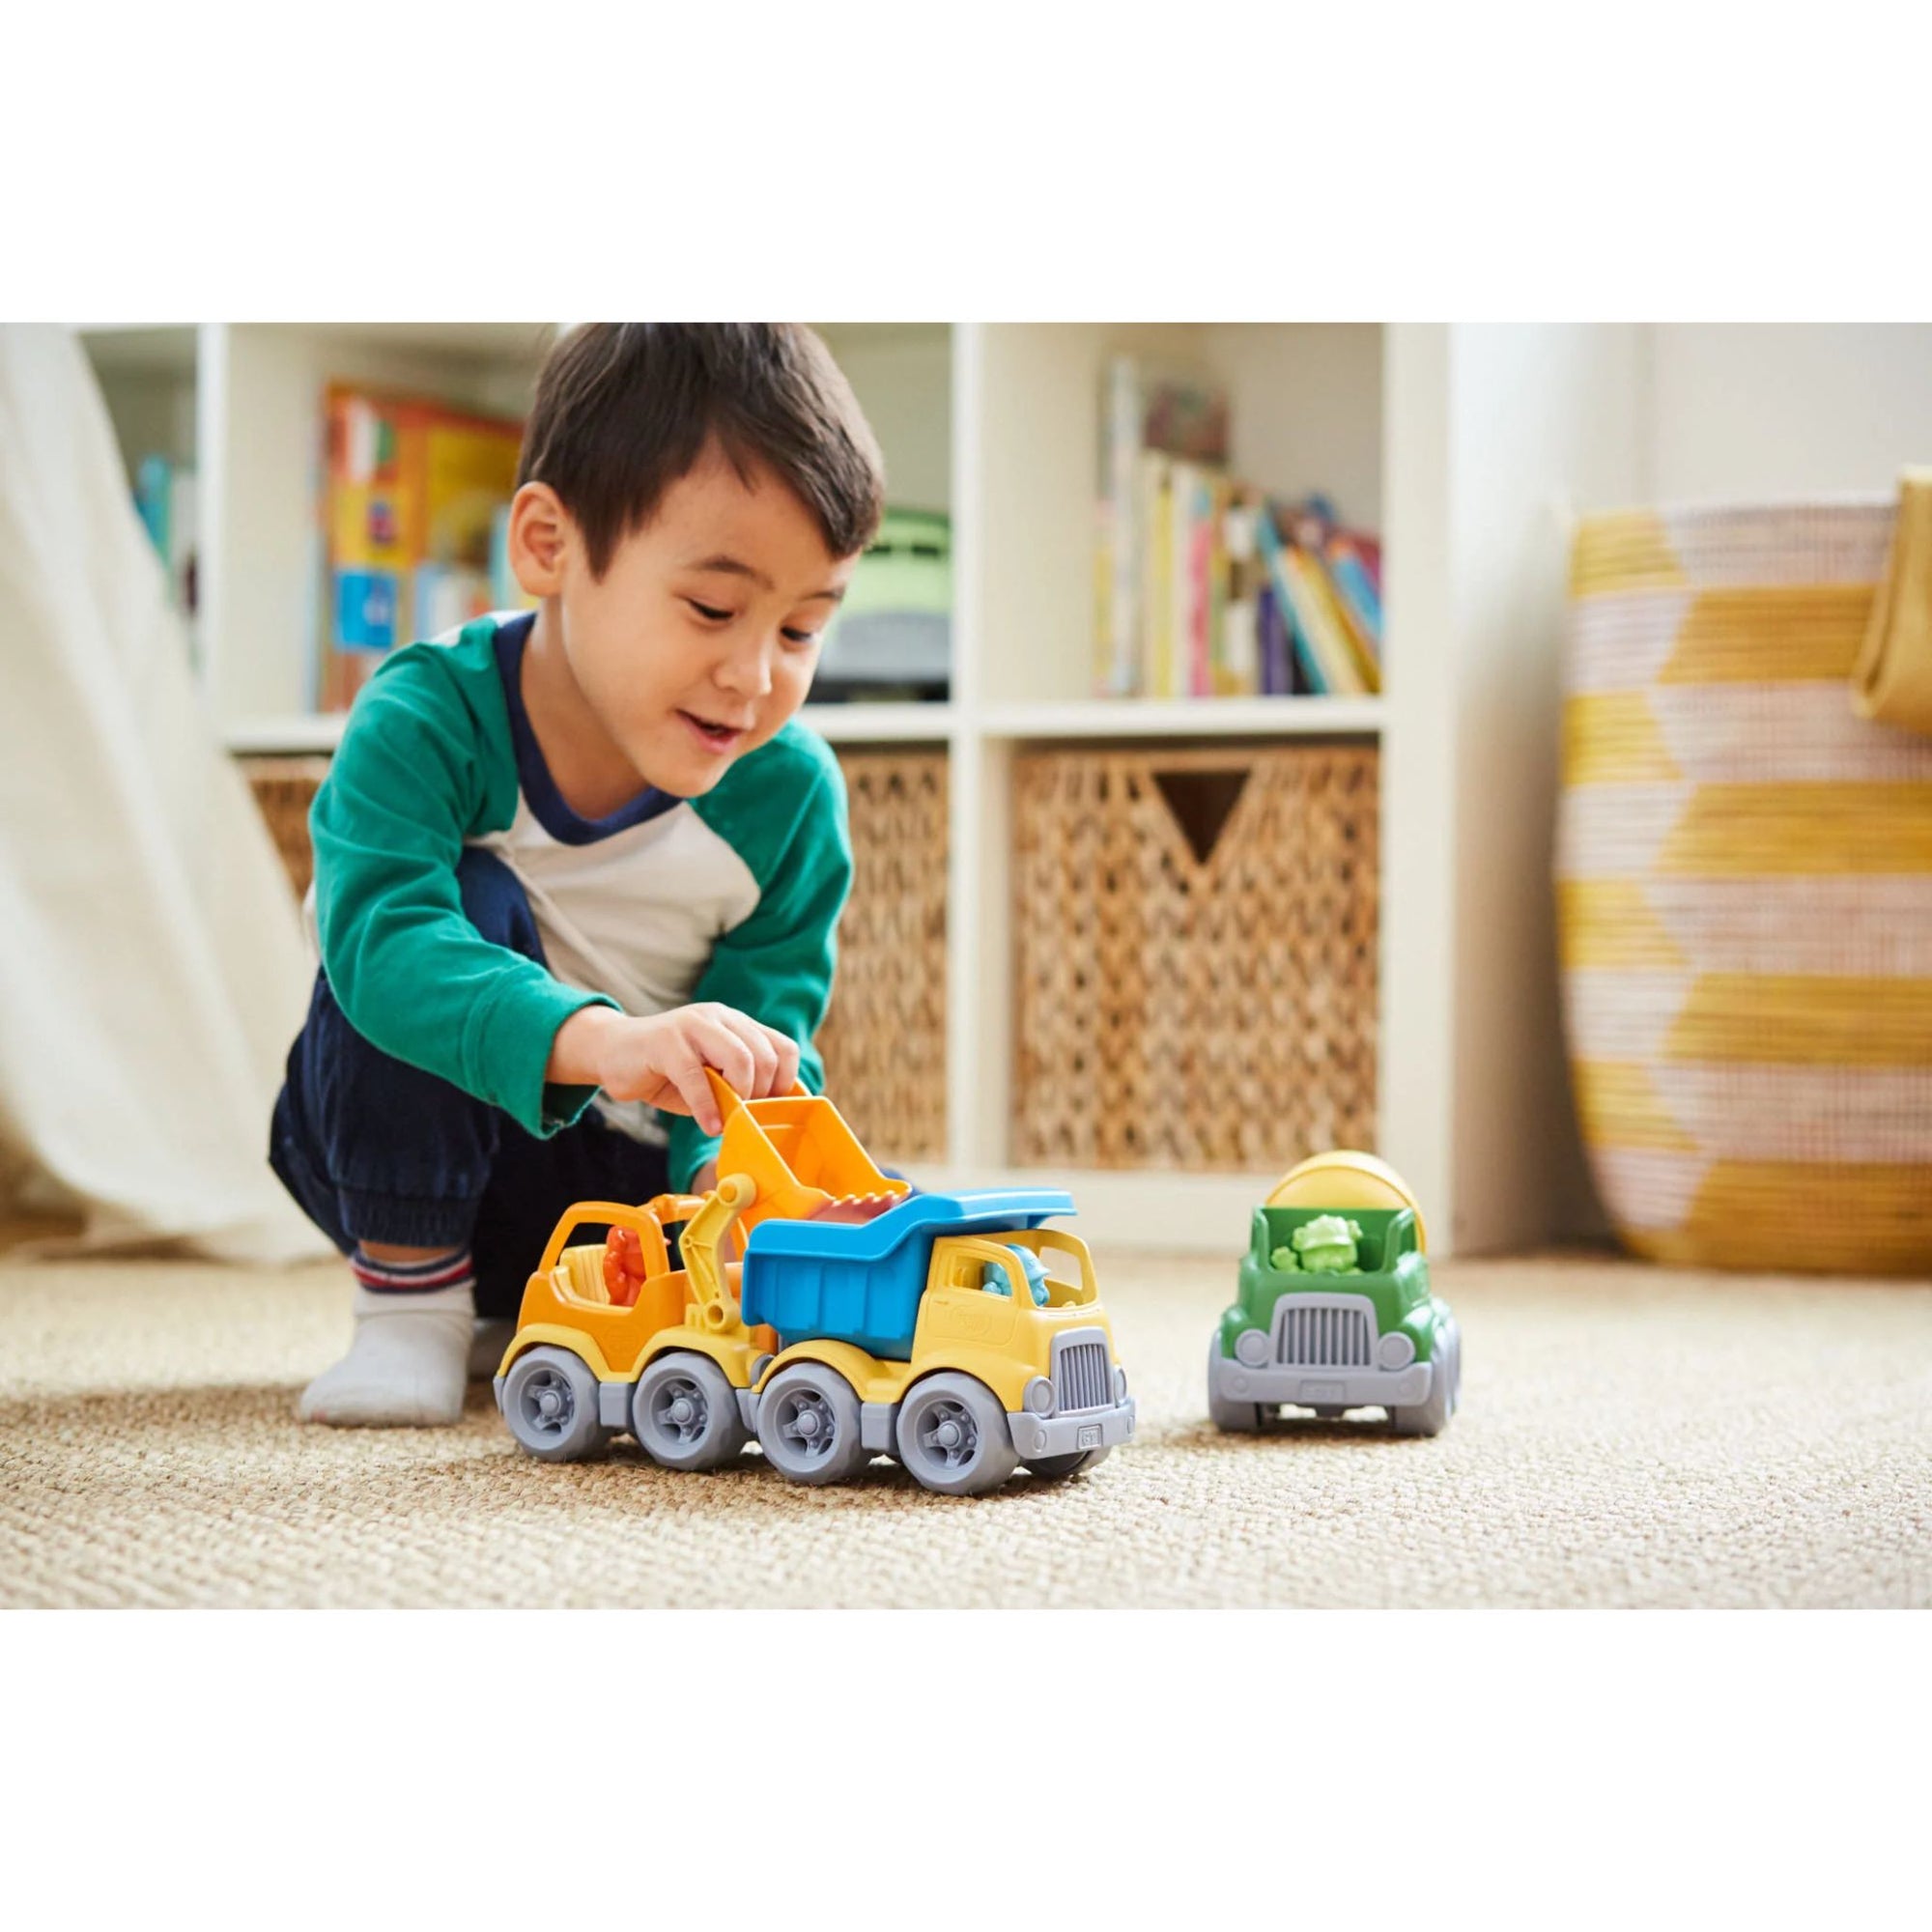 Green Toys Scooper Construction Truck